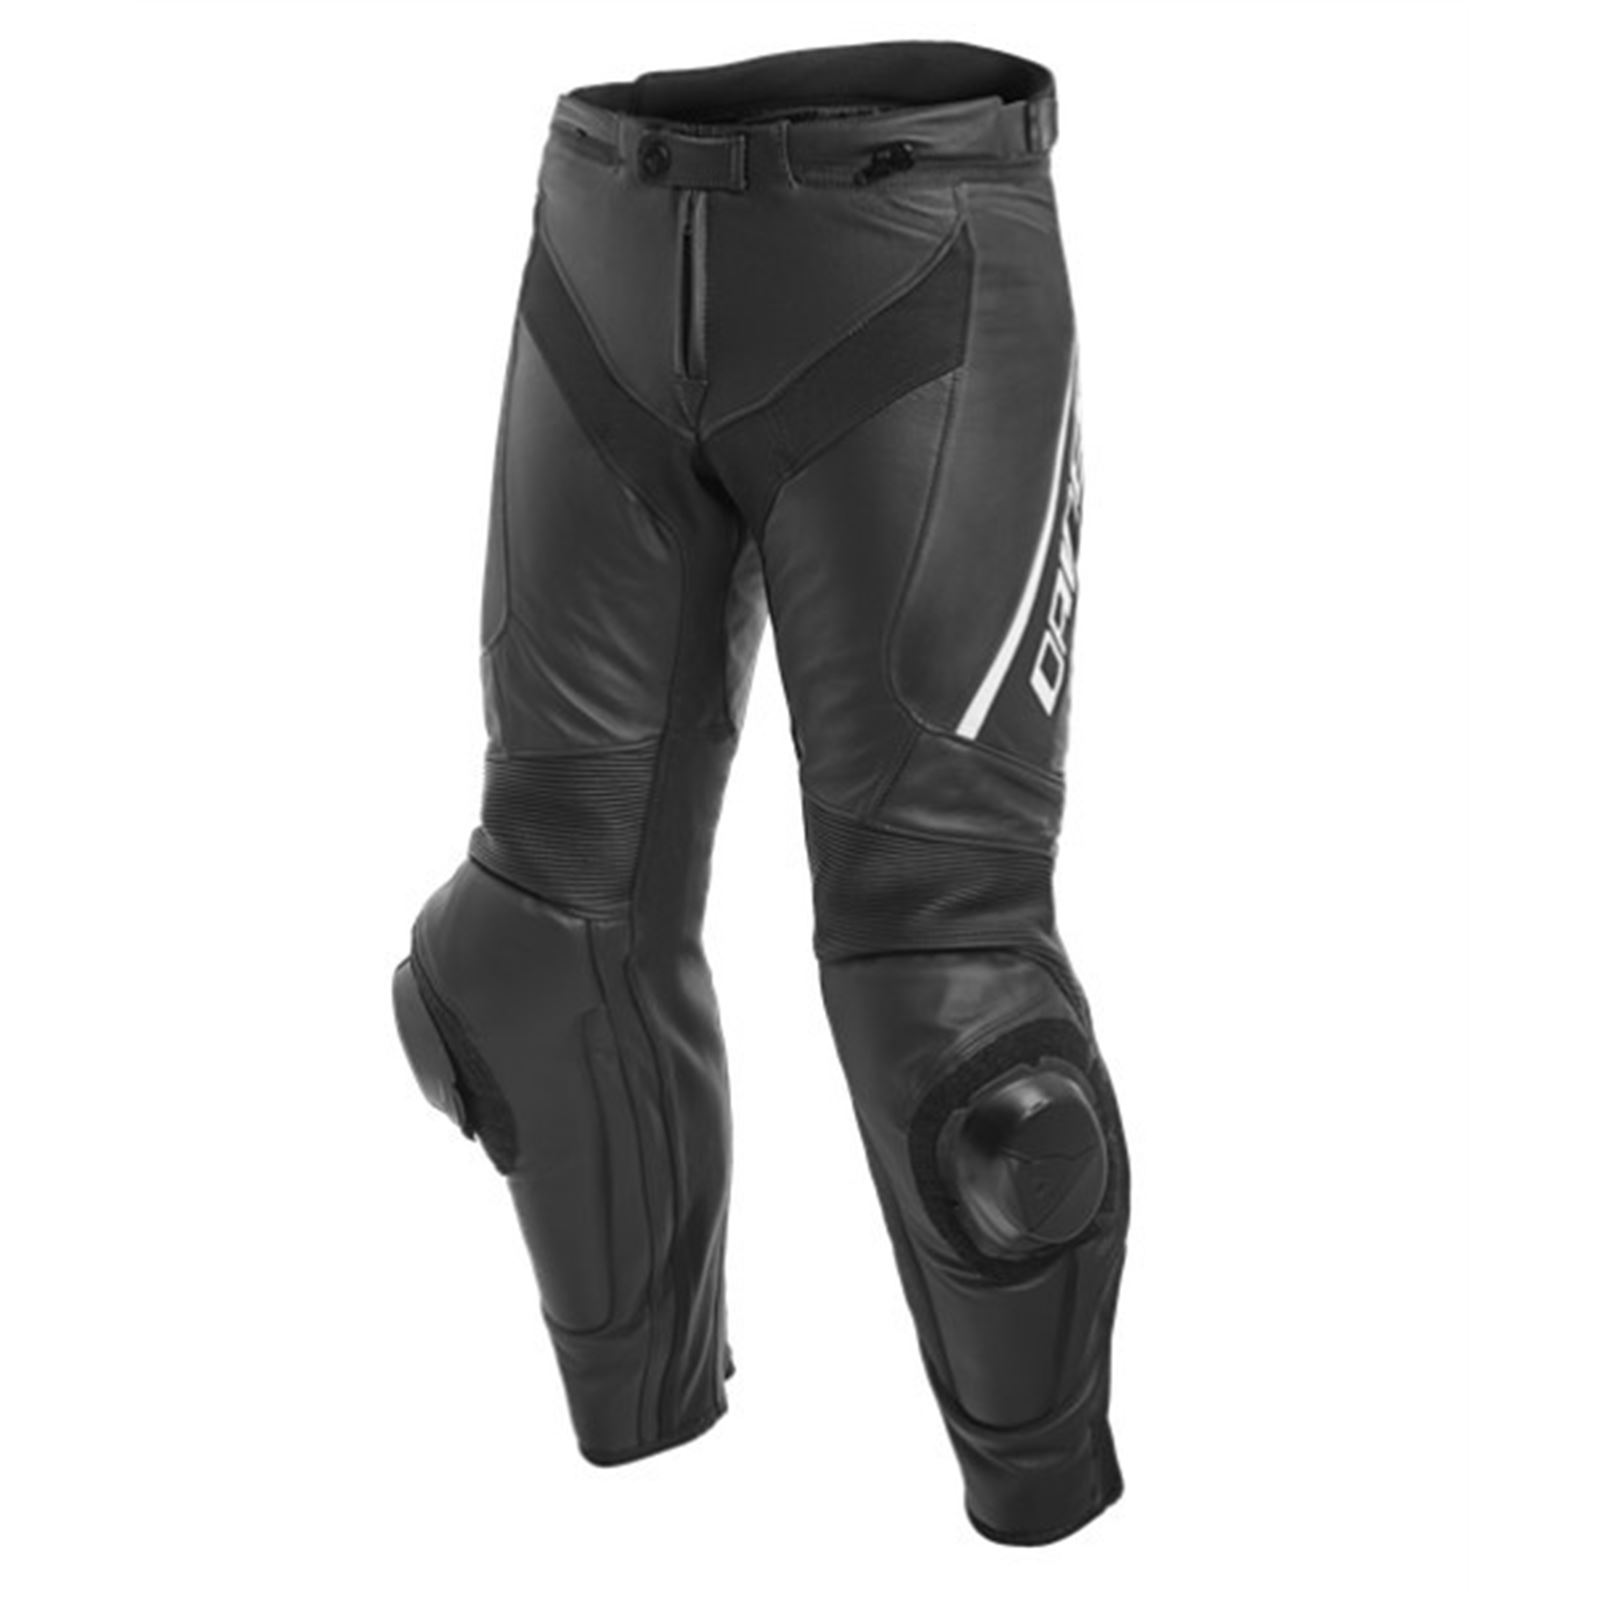 Dainese Men's Delta 3 Perforated Leather Pants - Size 46 - Black/White